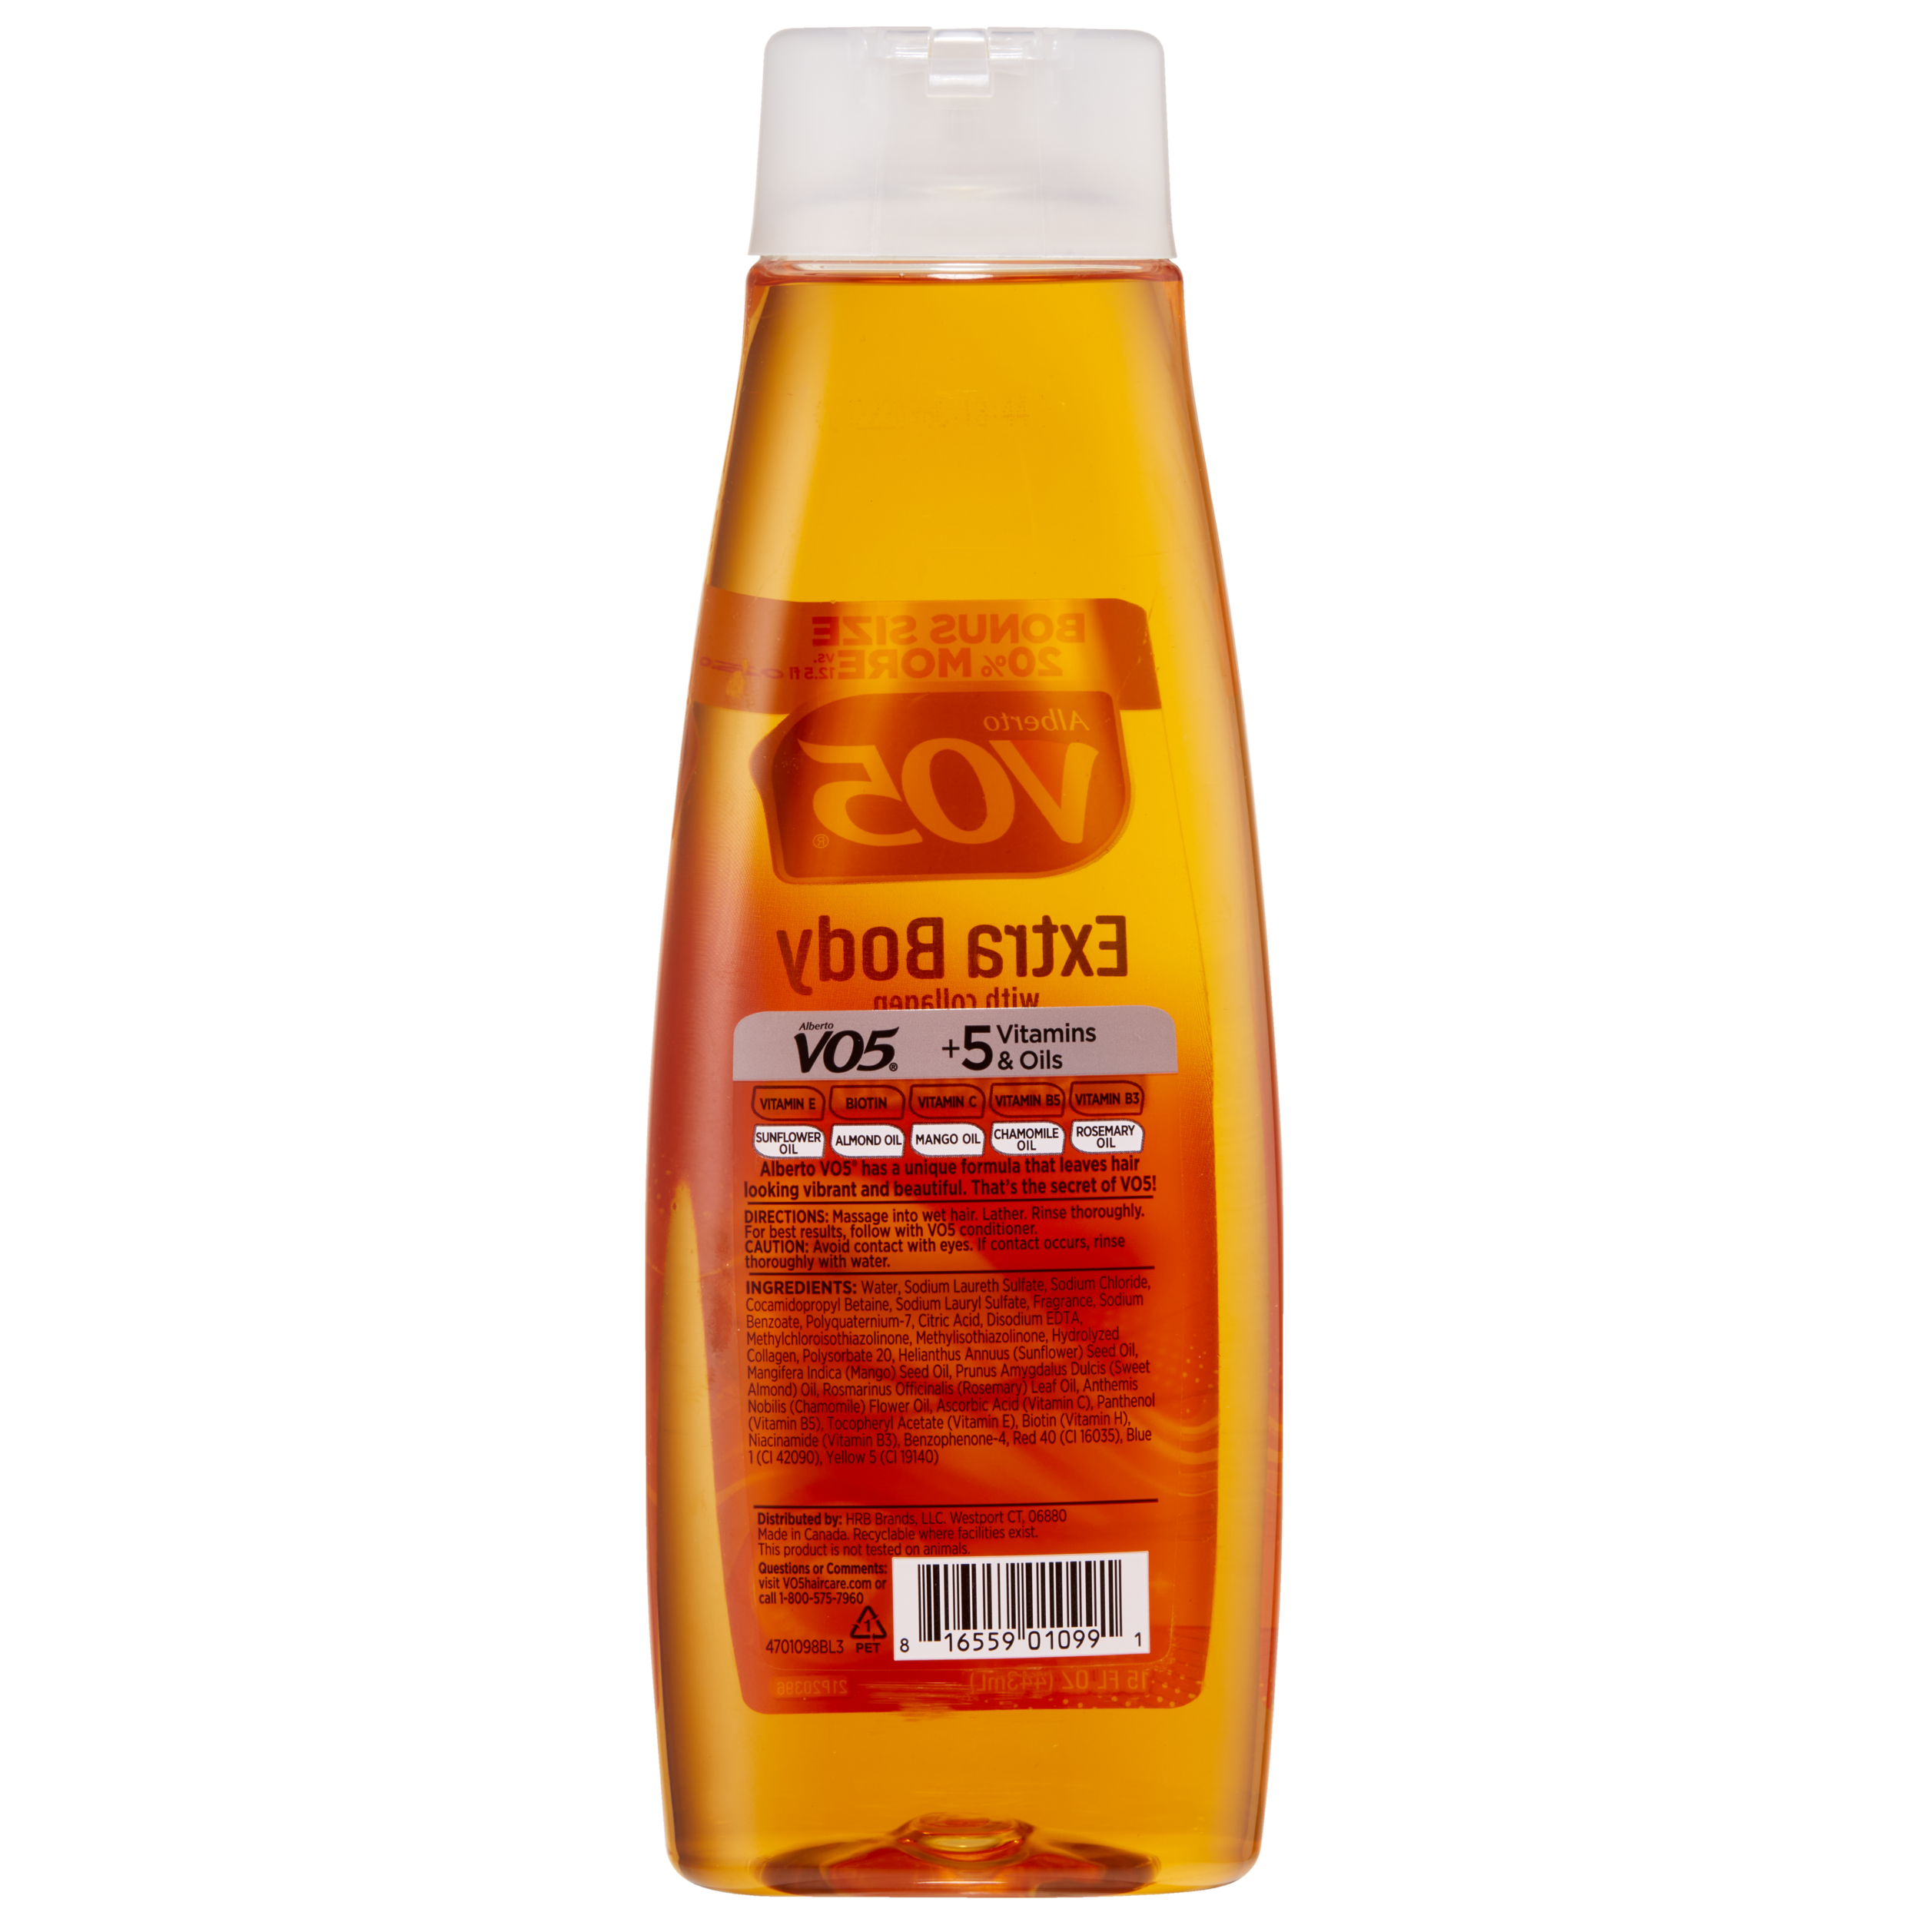 Alberto VO5 Extra Body Hair Shampoo, with Collagen, for Fullness and Volume, 15 fl oz - image 2 of 7